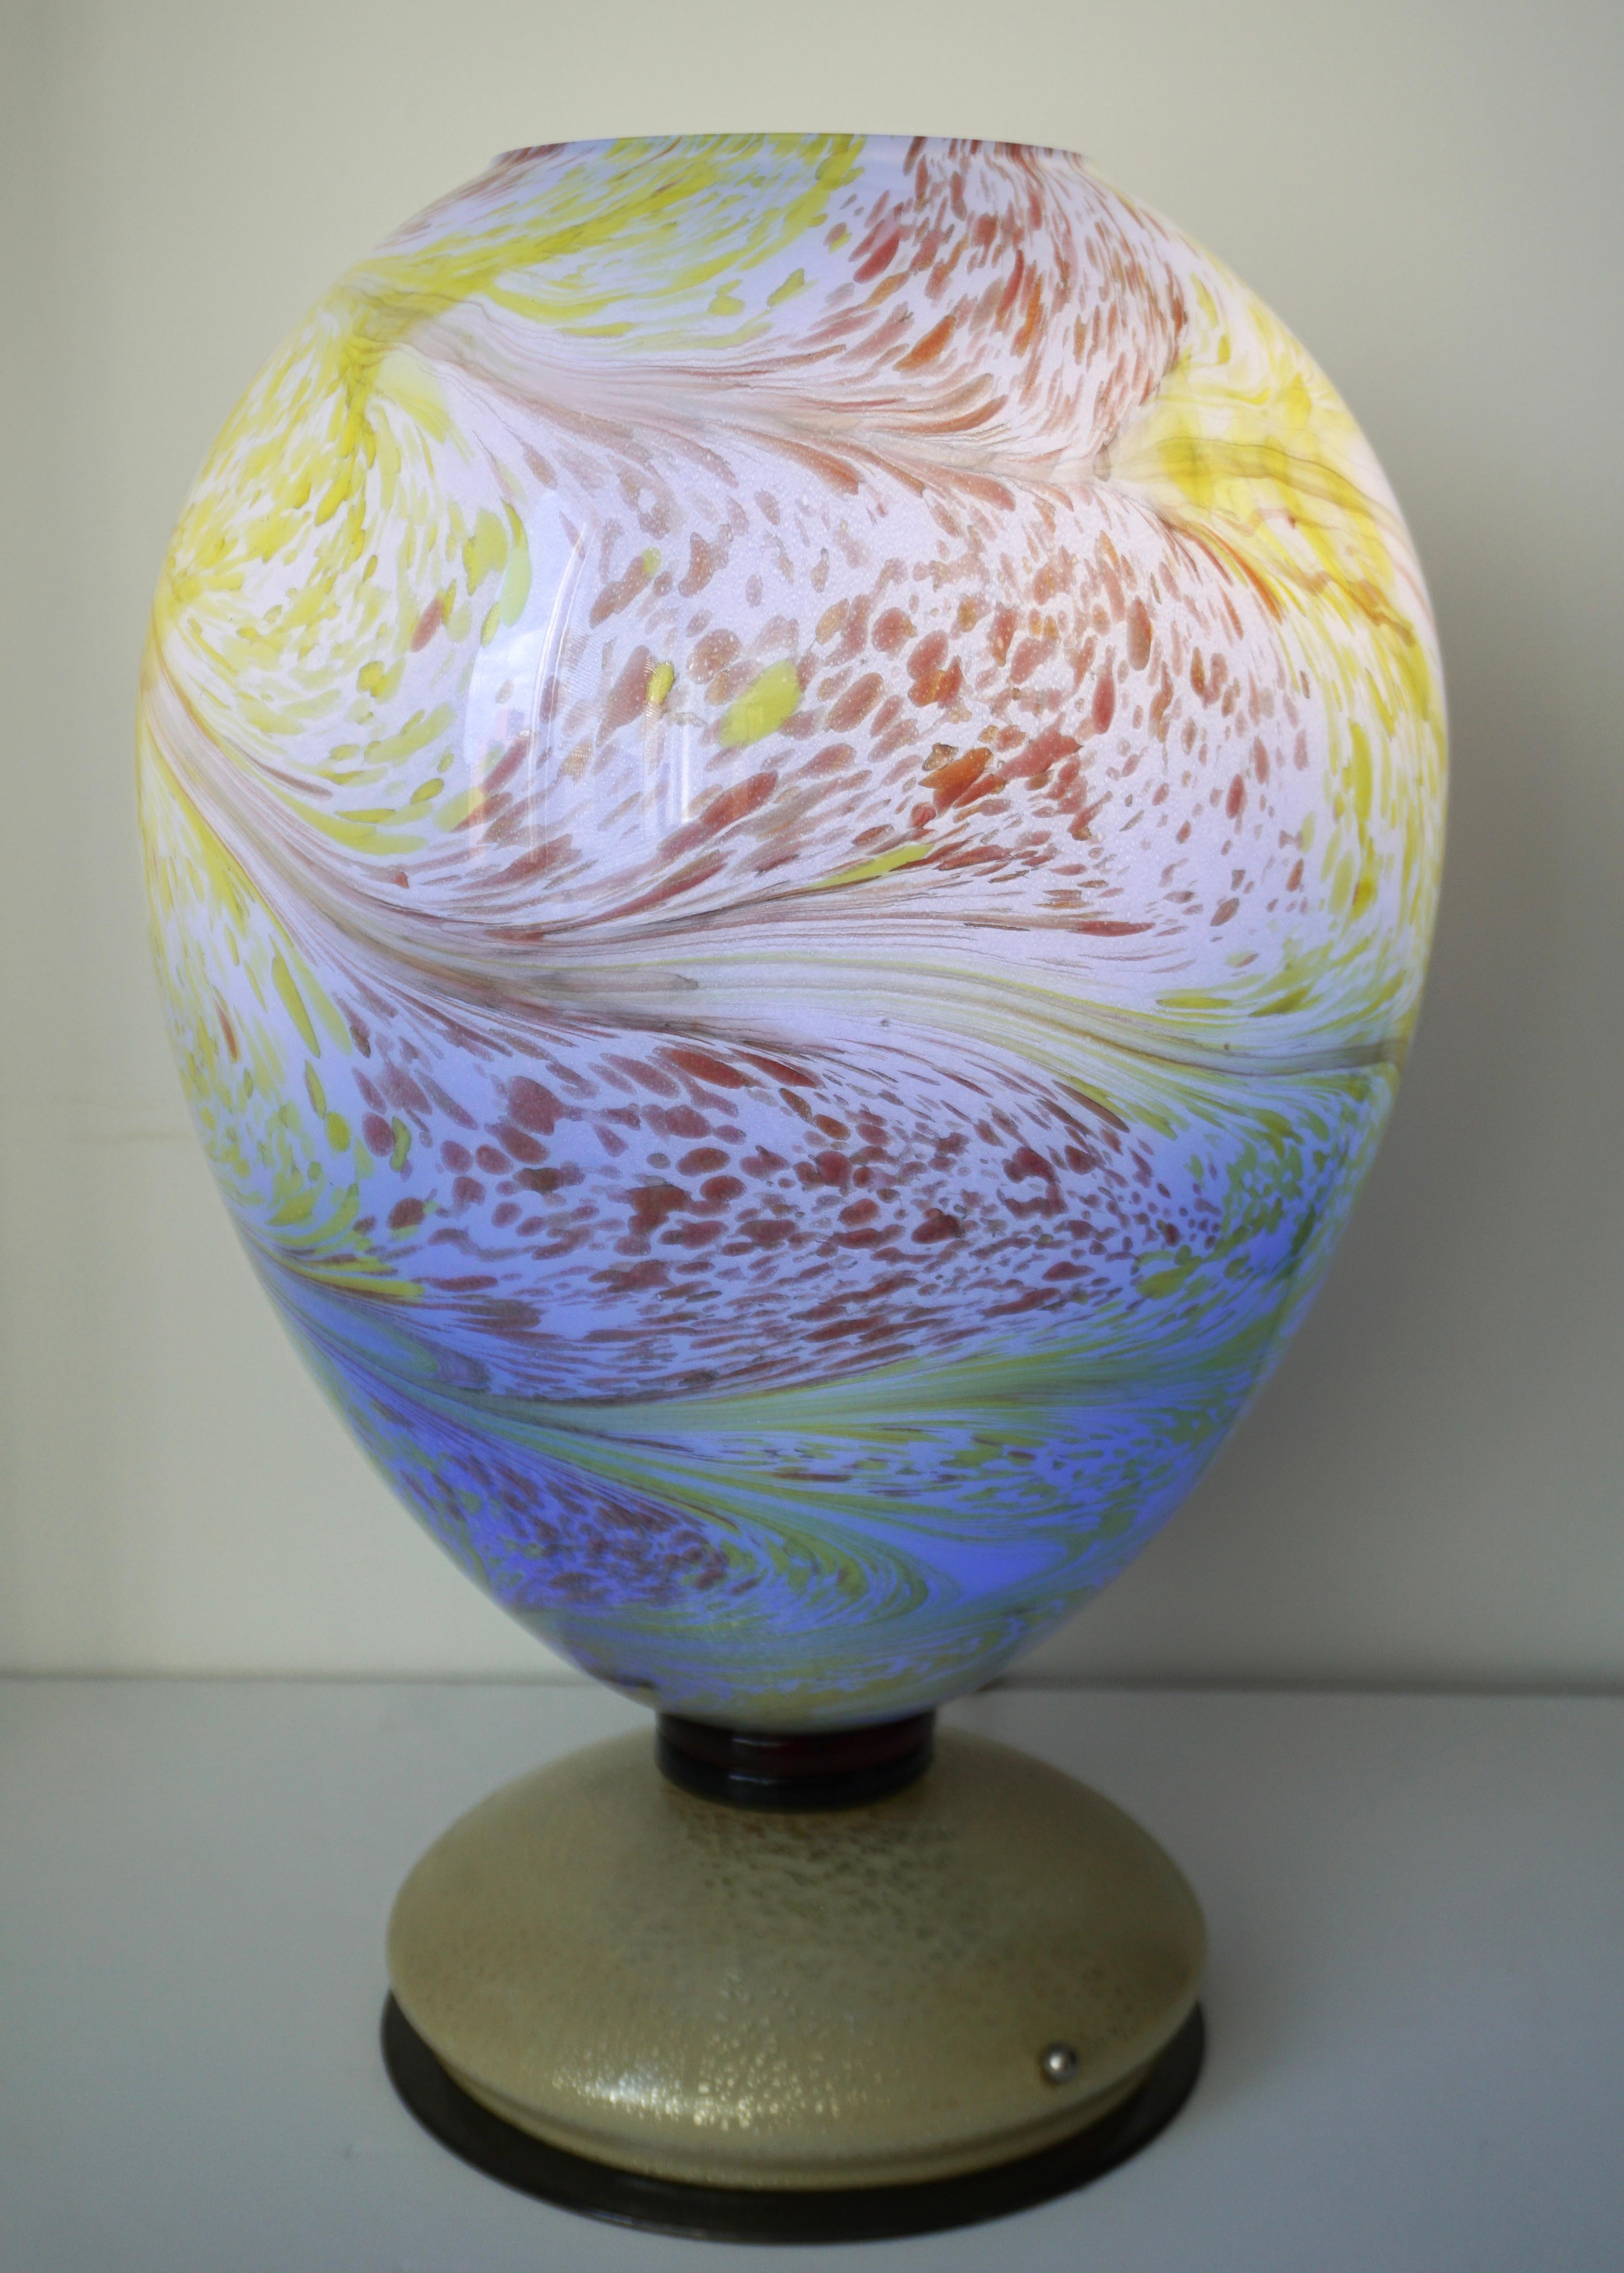 Italian Venetian egg-shaped lamp in mouth-blown Murano glass worked with fantastic swirls of colors and overlaid so that the colors change depending on the light, on a cream glass base worked with expanded pure gold leaf, resting on a metal plate.